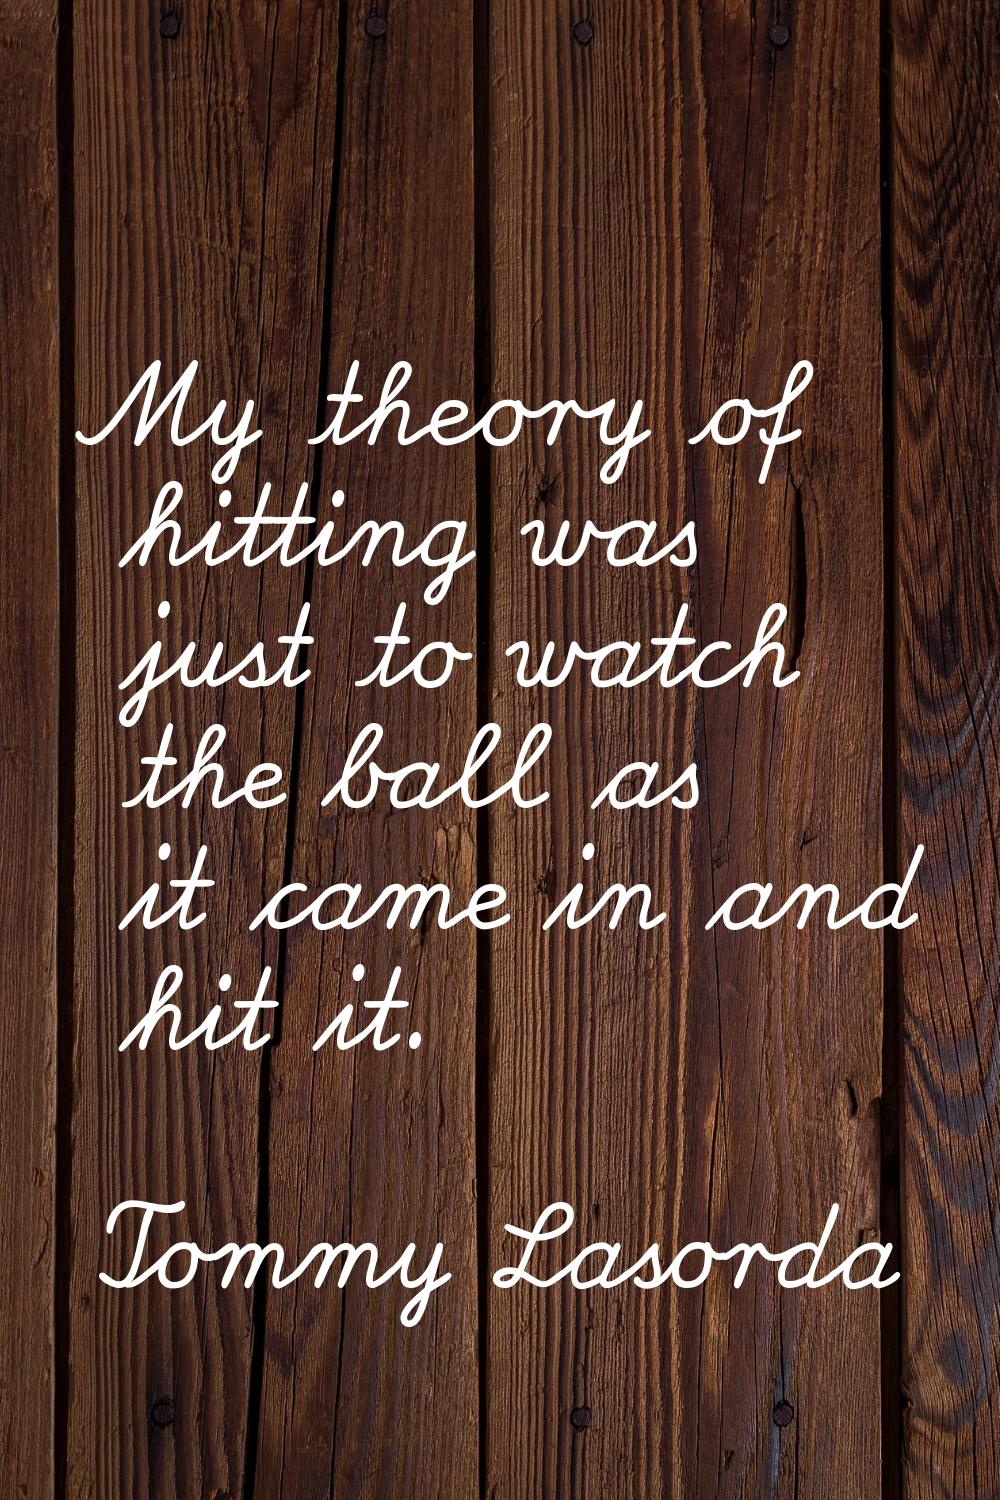 My theory of hitting was just to watch the ball as it came in and hit it.